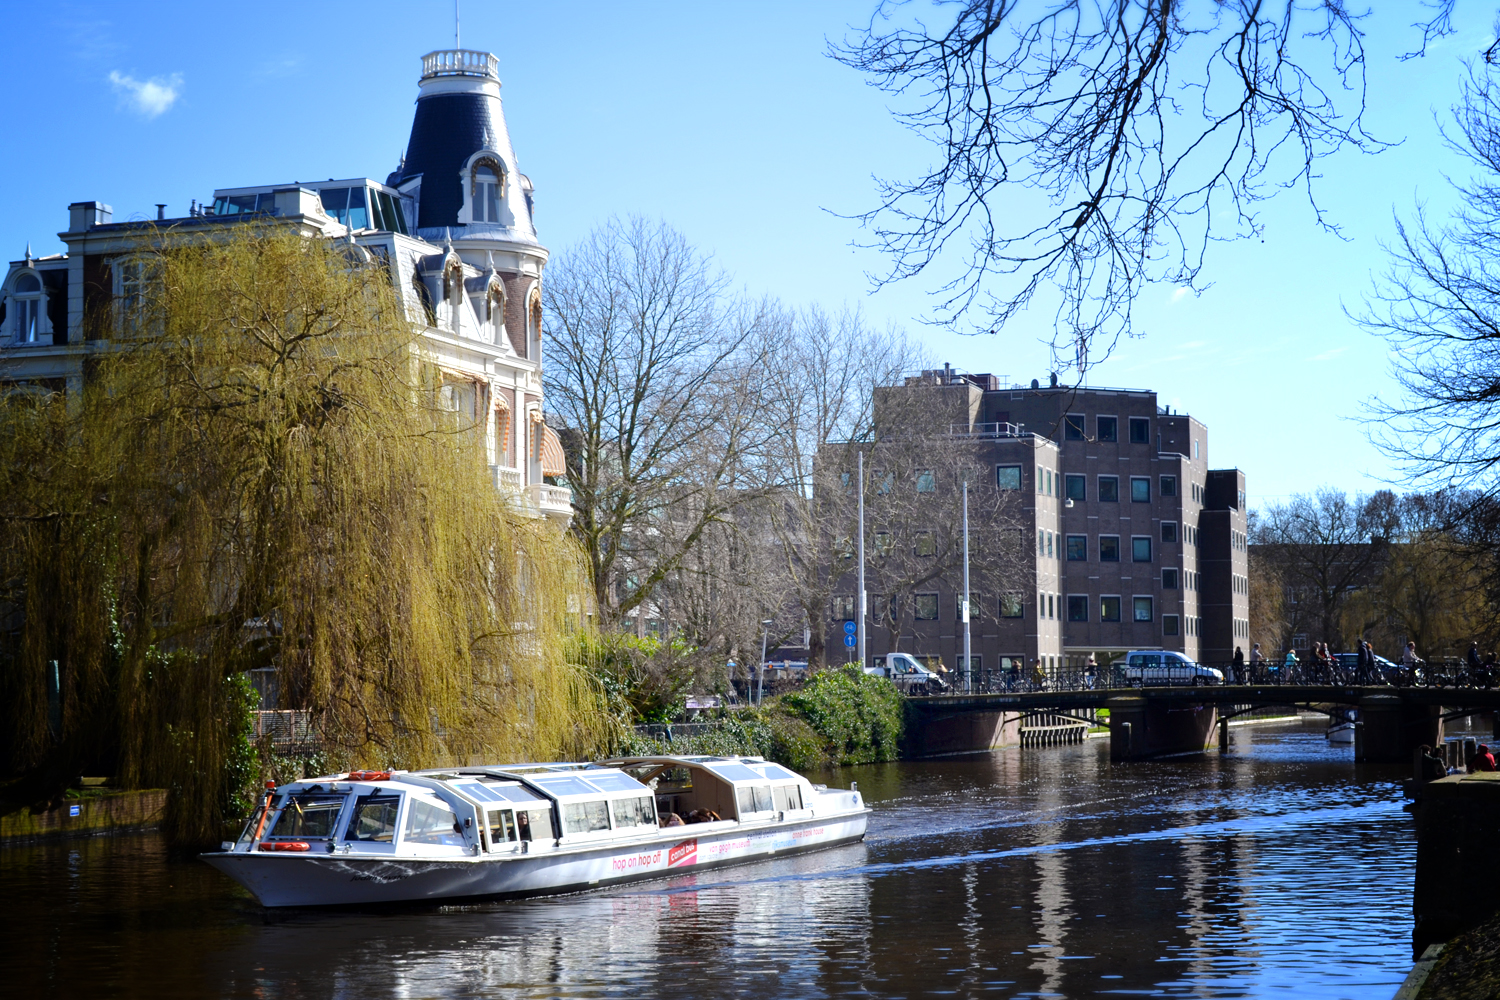 Boat on the Amsterdam canal